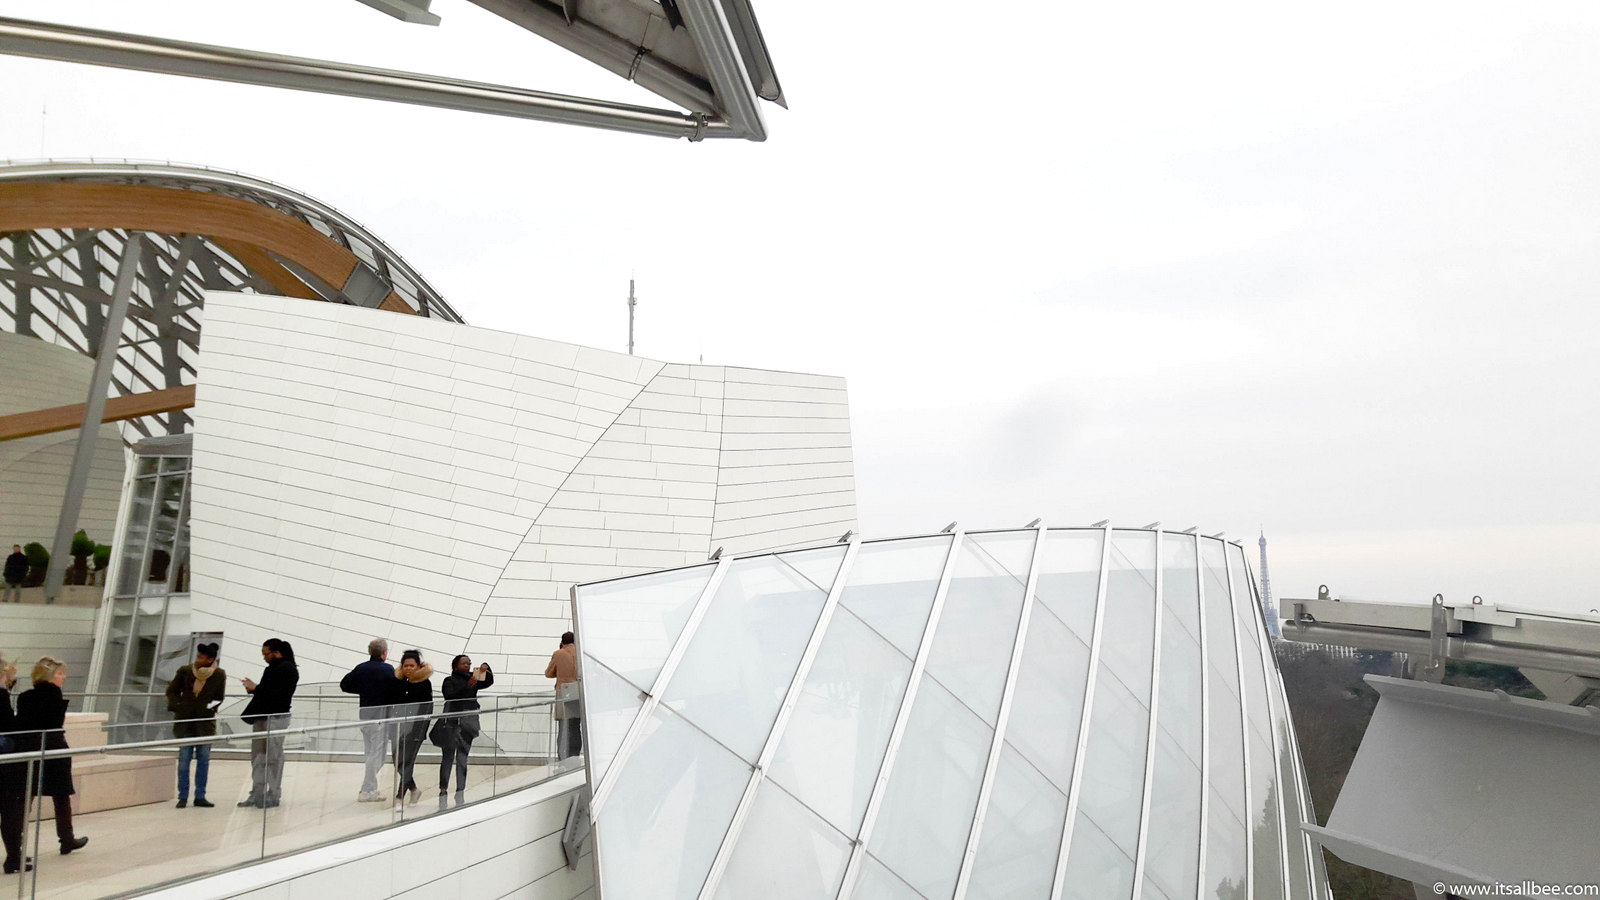 Foundation Louis Vuitton In Paris - Tips on Fondation Louis Vuitton Museum Tickets, opening Hours and Metro directions from Paris.